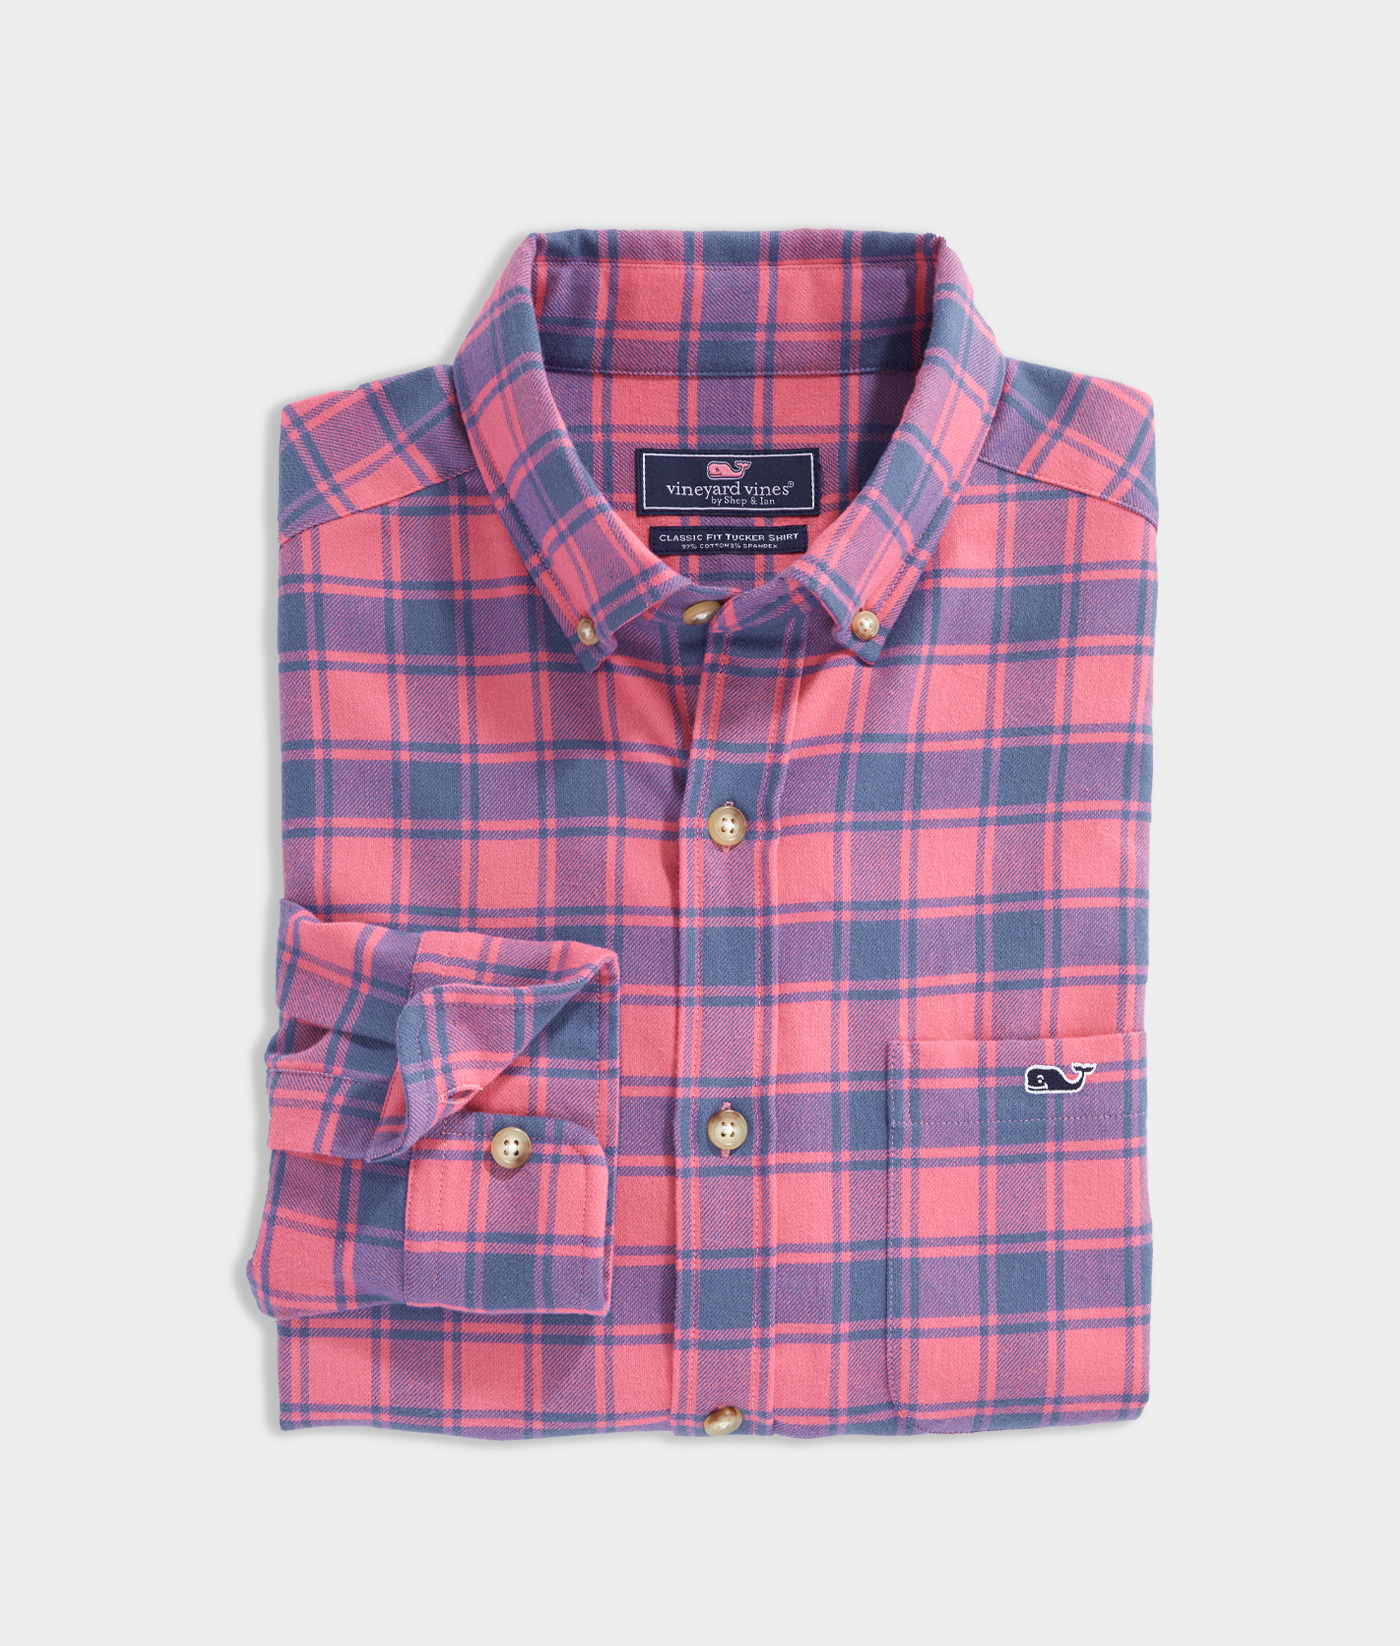 Classic Fit Plaid Shirt in Stretch Flannel